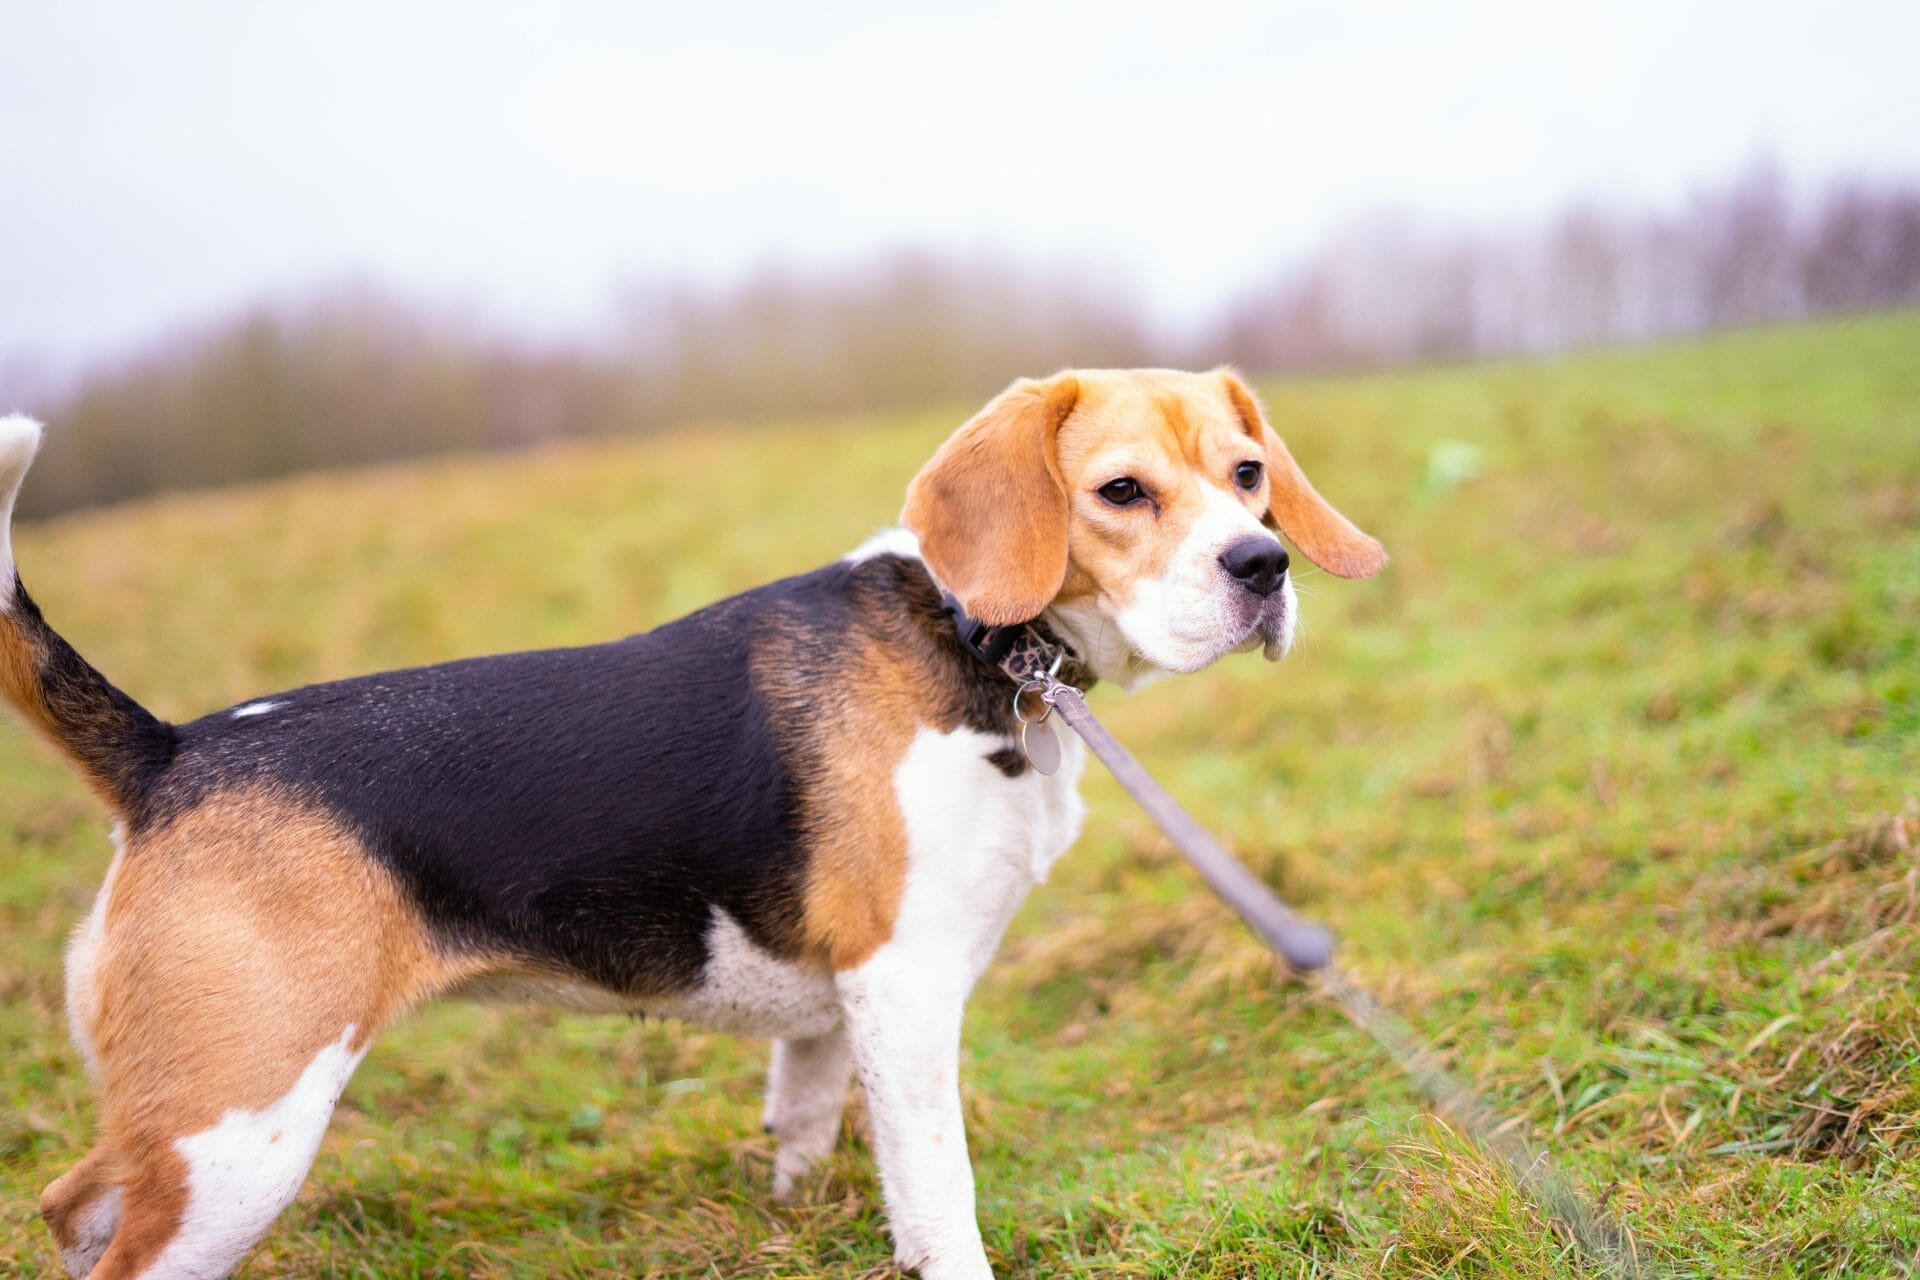 How To Discipline A Beagle? Strategies for Success